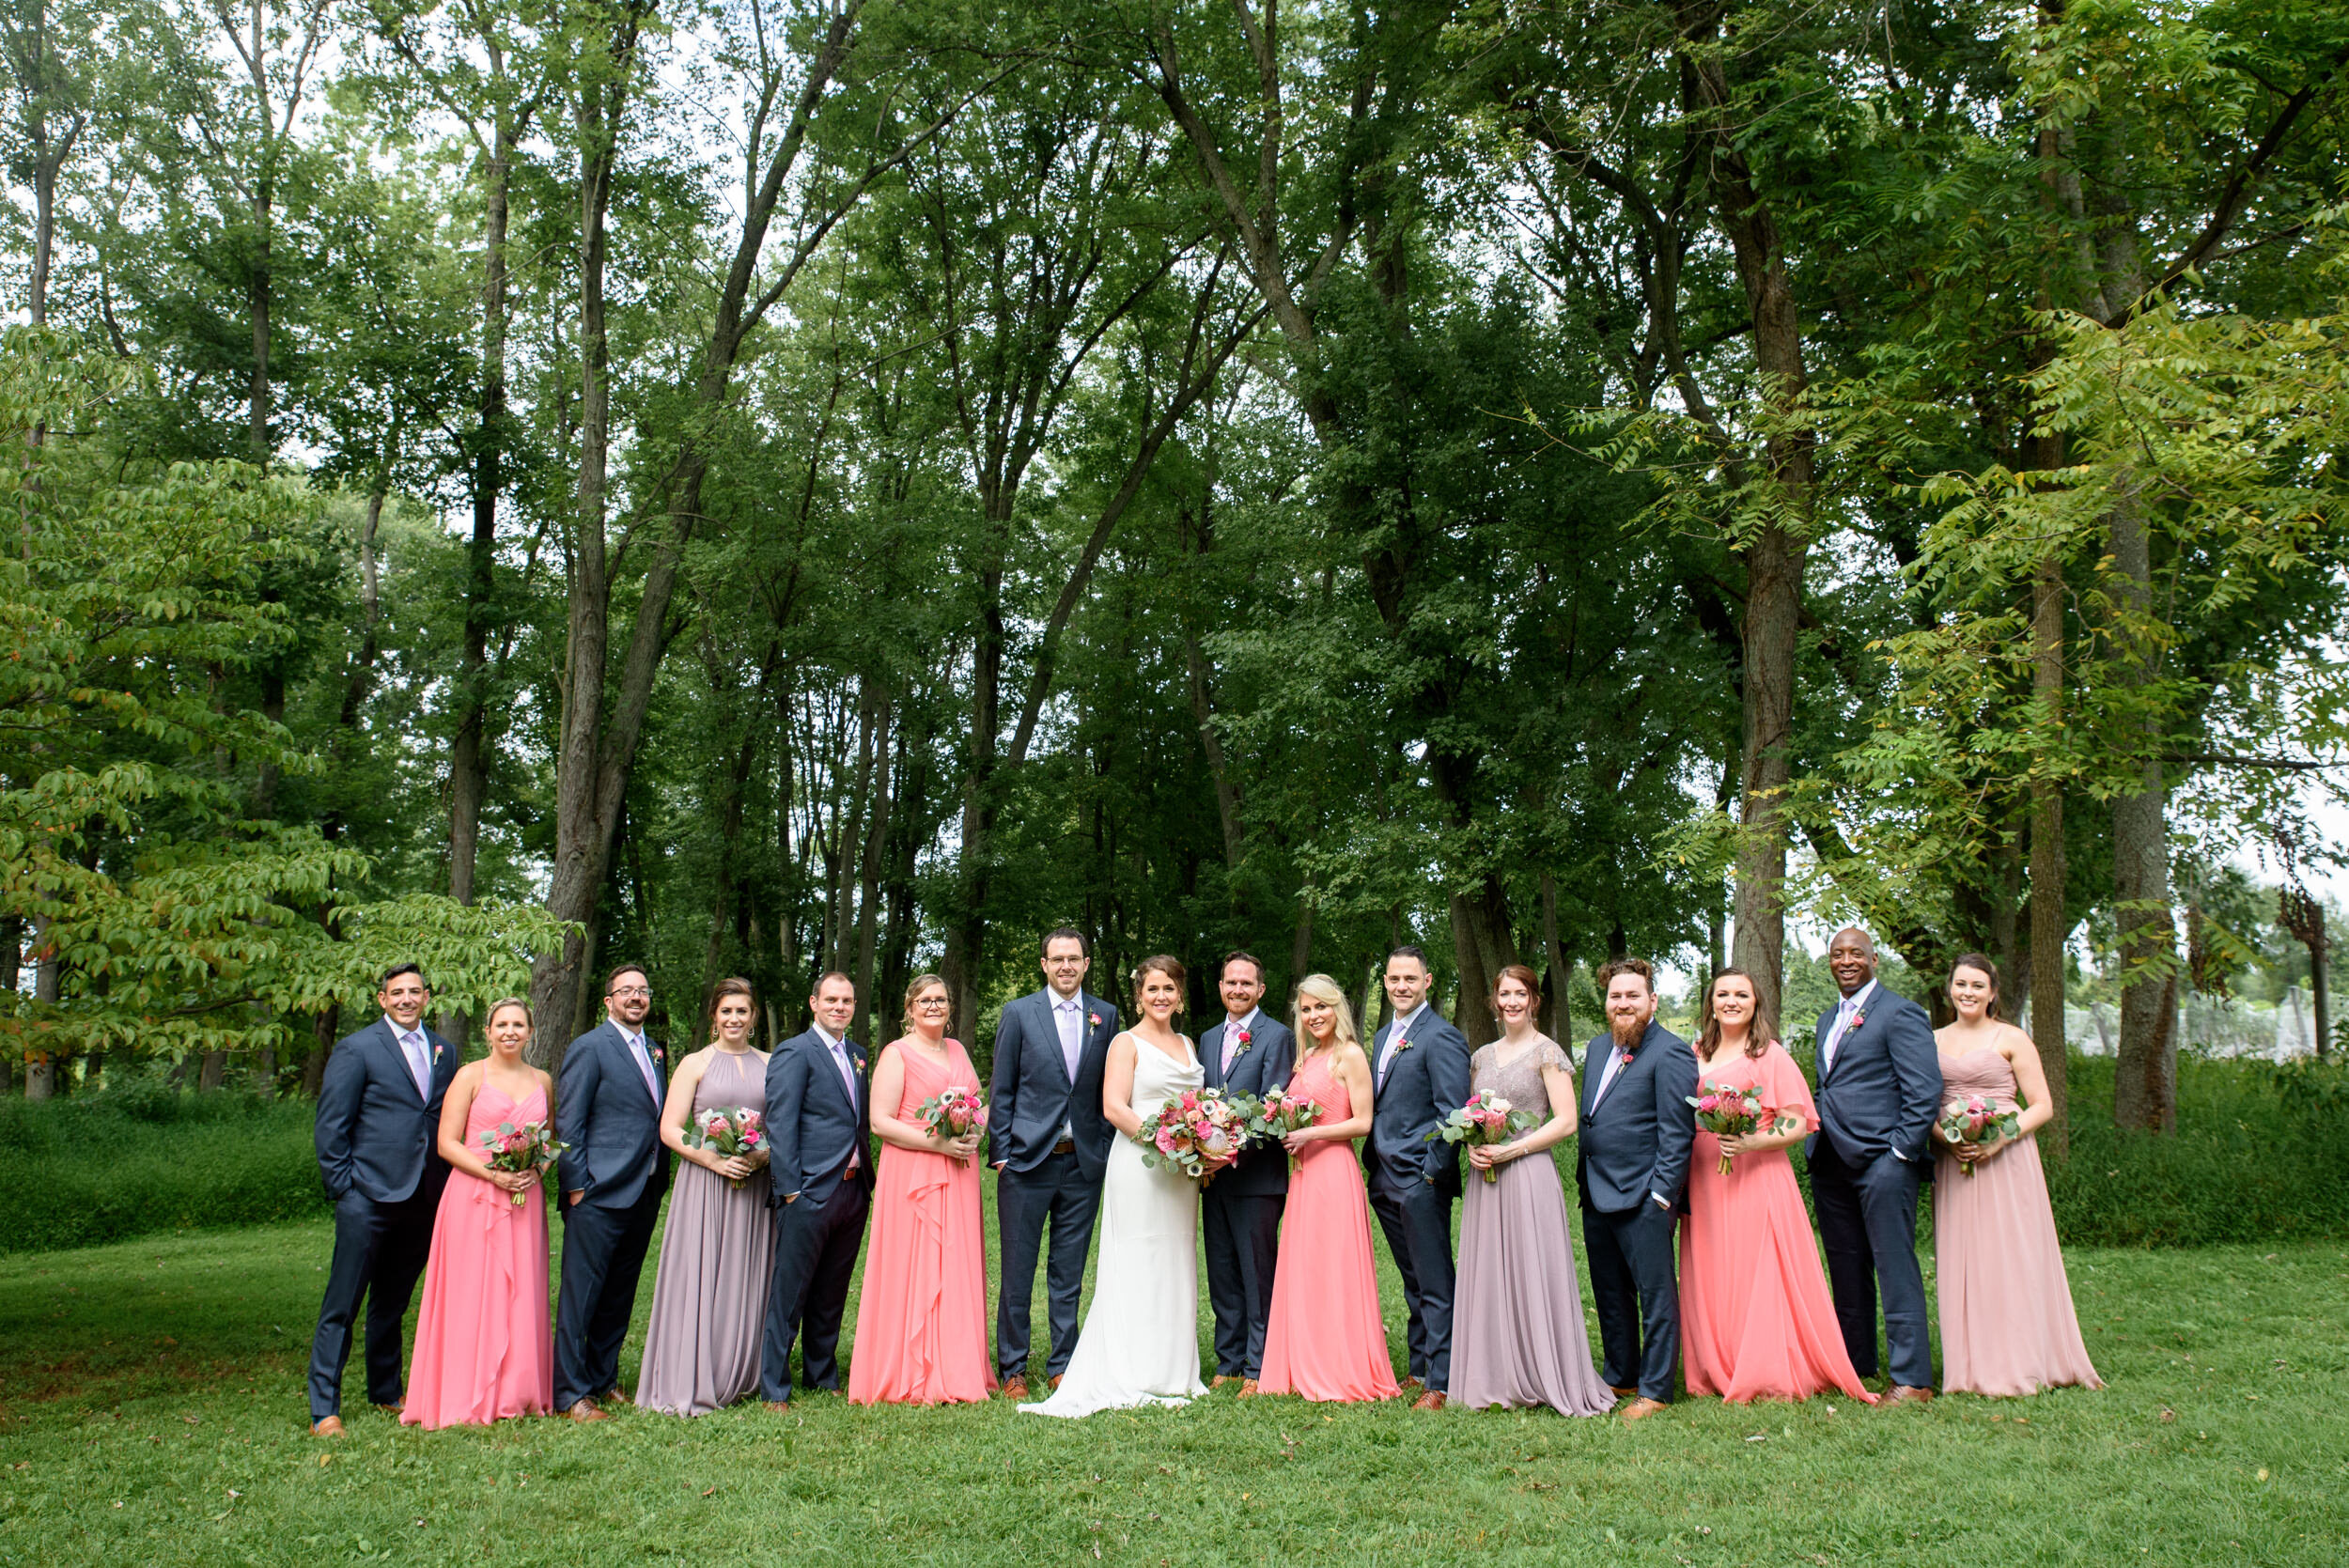 Bridal party at Unionville Vineyards - New Jersey wedding photographer